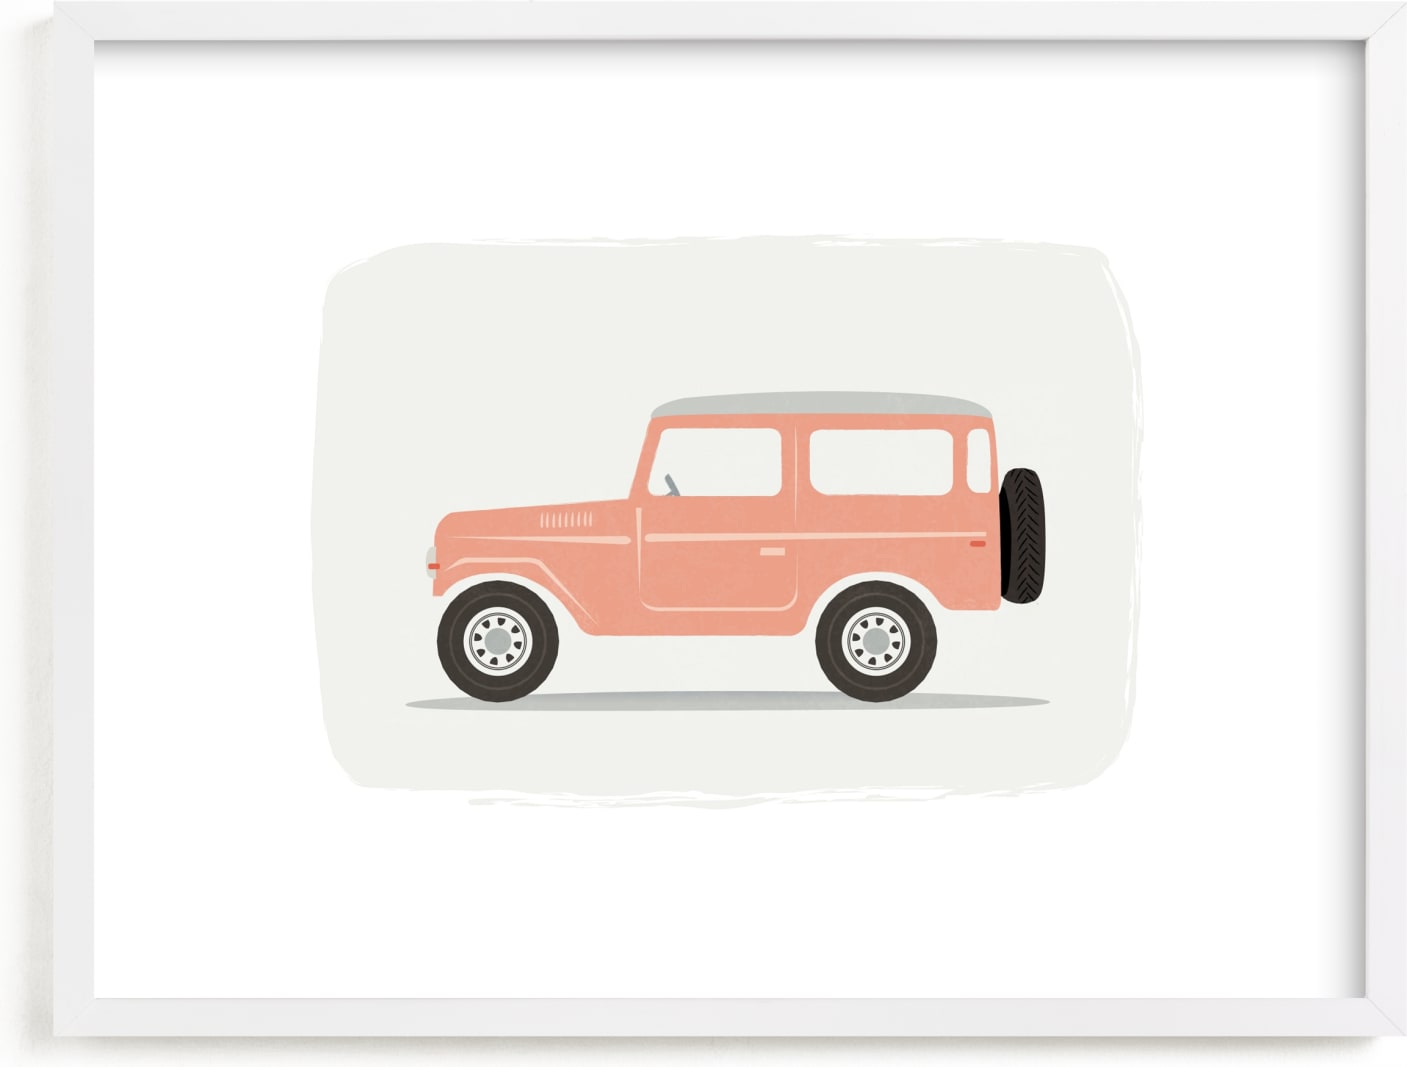 This is a grey, pink, black art by Karidy Walker called Vintage Land Cruiser.